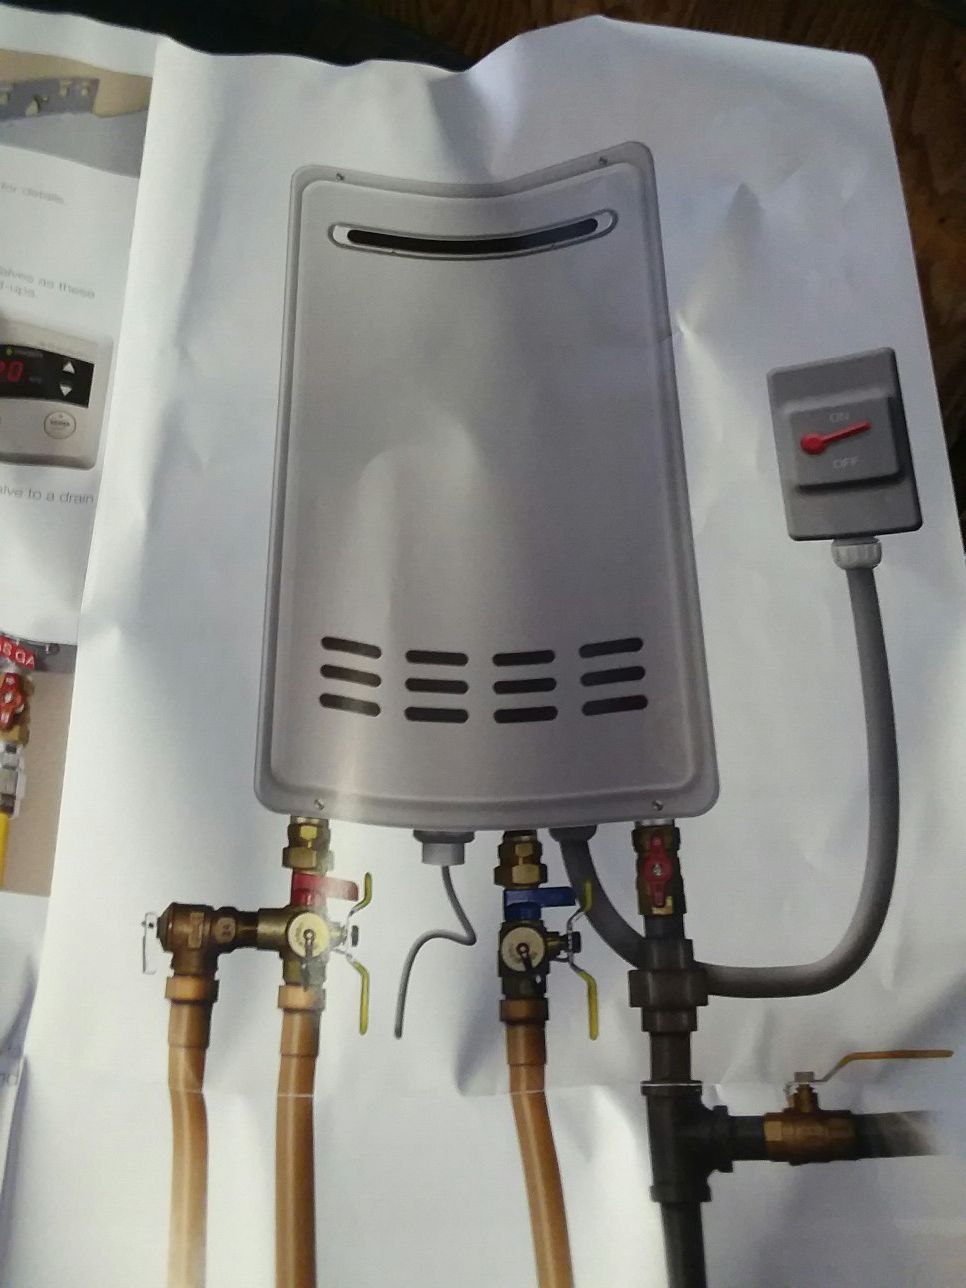 Model no., RTG-64xLP-1 Brand new in box, L.P. Tankless Water Heater.